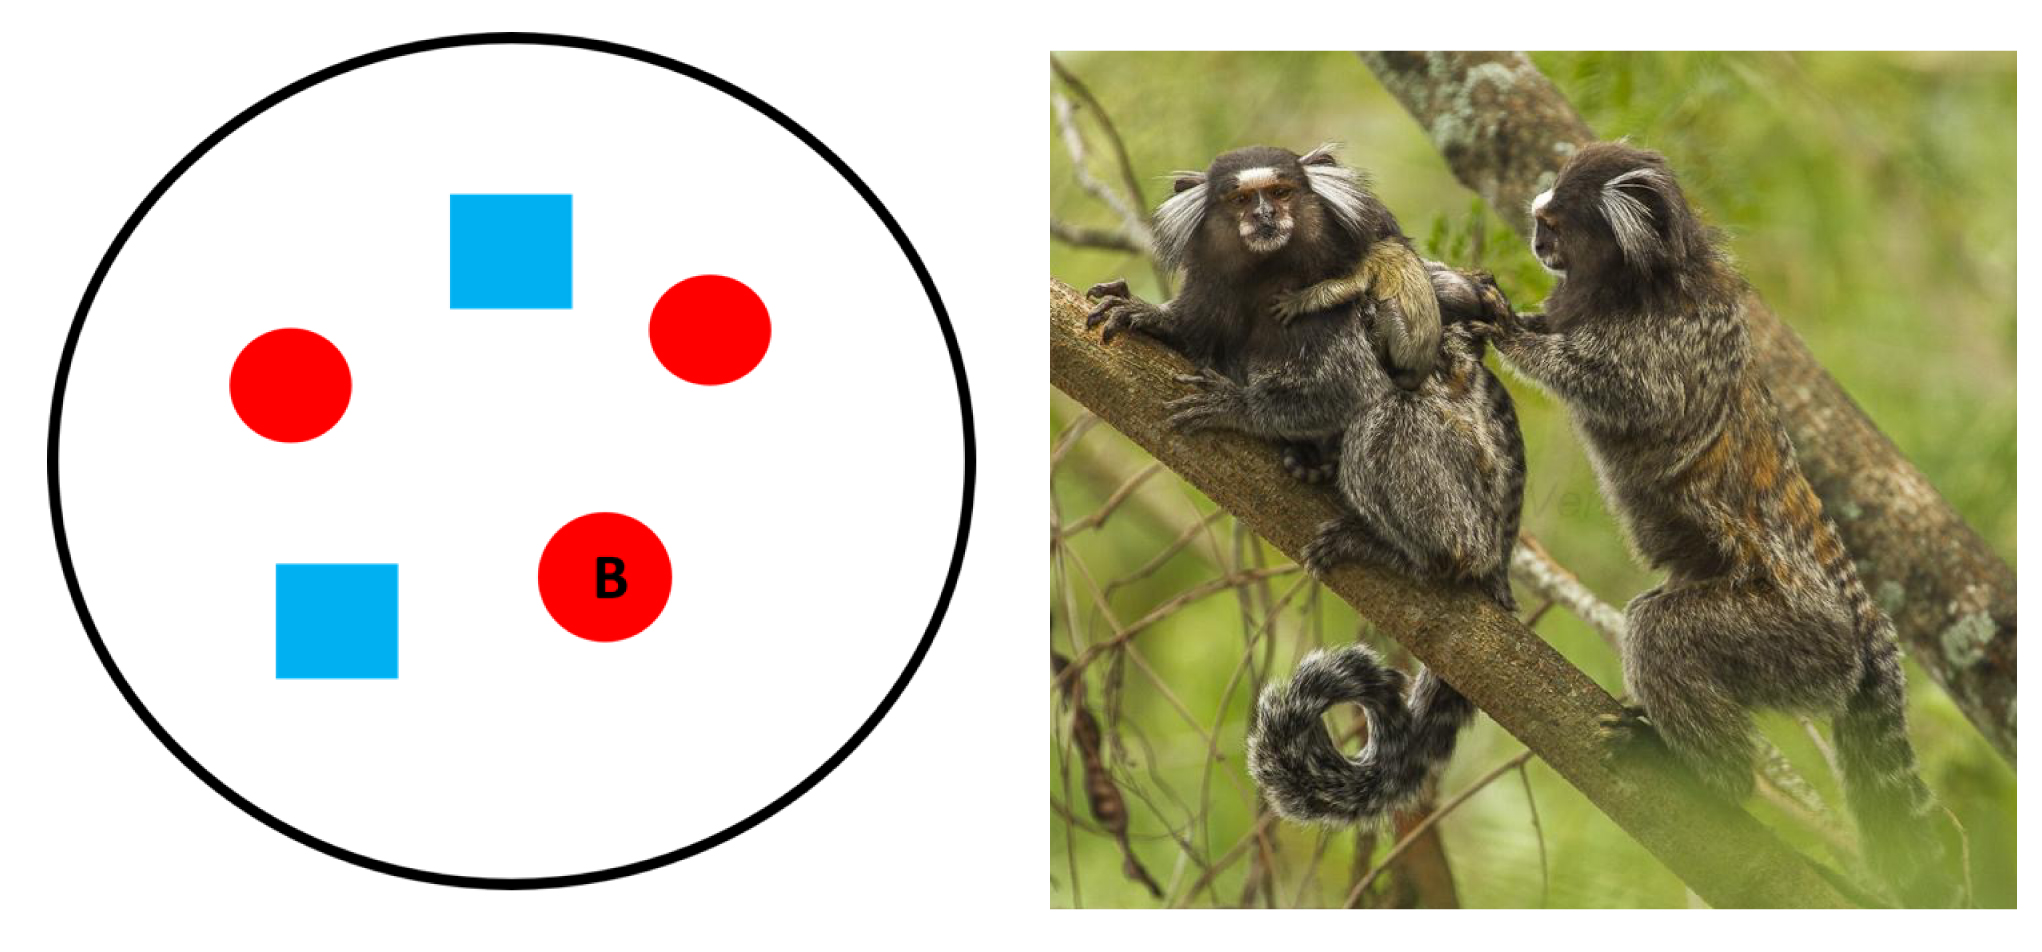 Circle contains two squares, two unmarked dots, and a B dot. Right: Marmosets with twins.